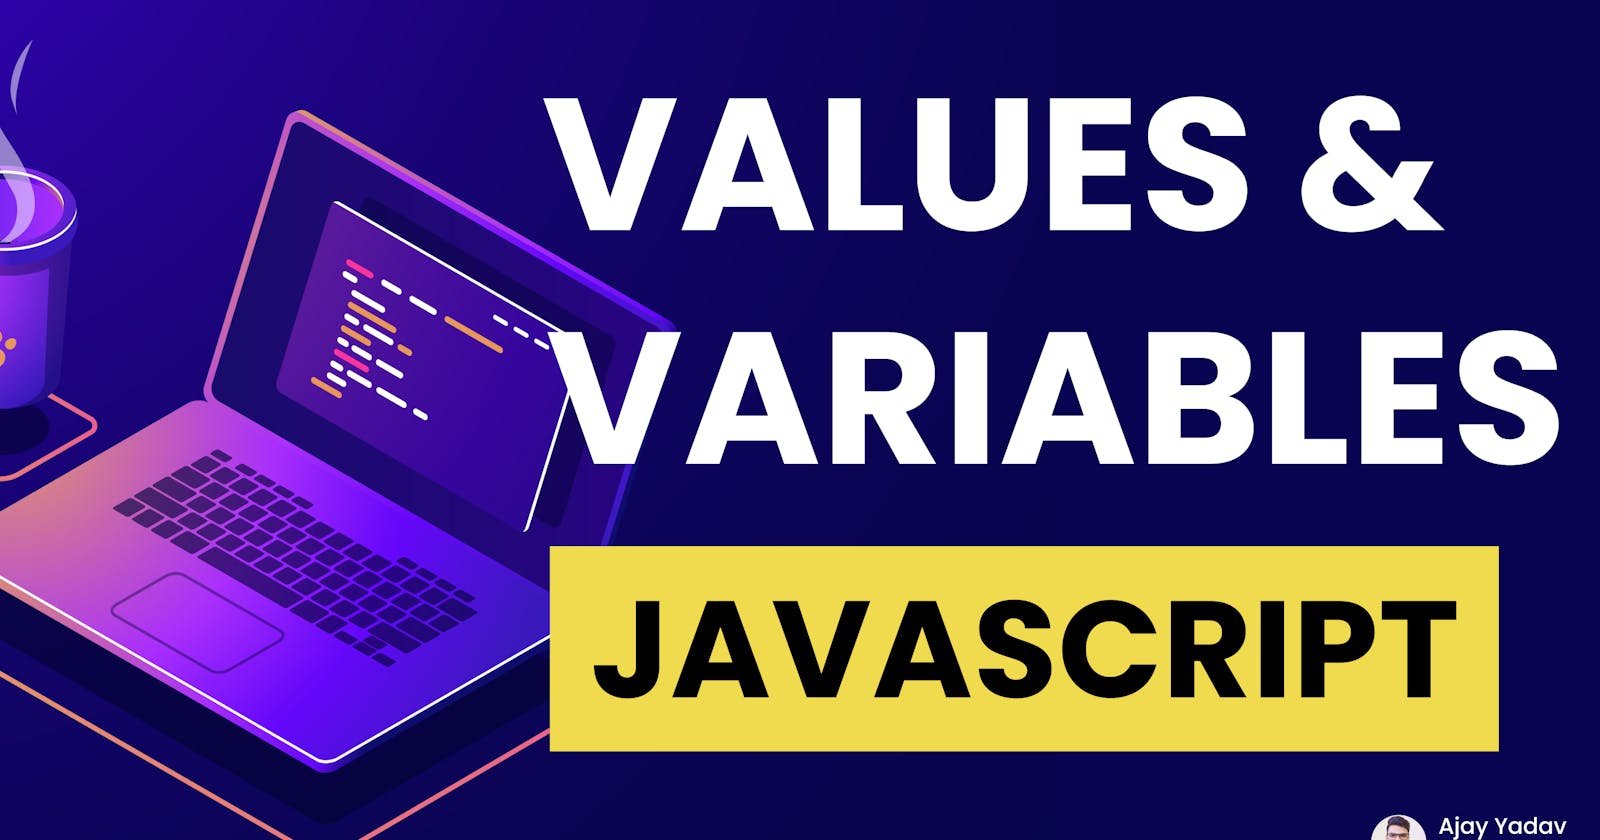 Values and Variable in JavaScript?